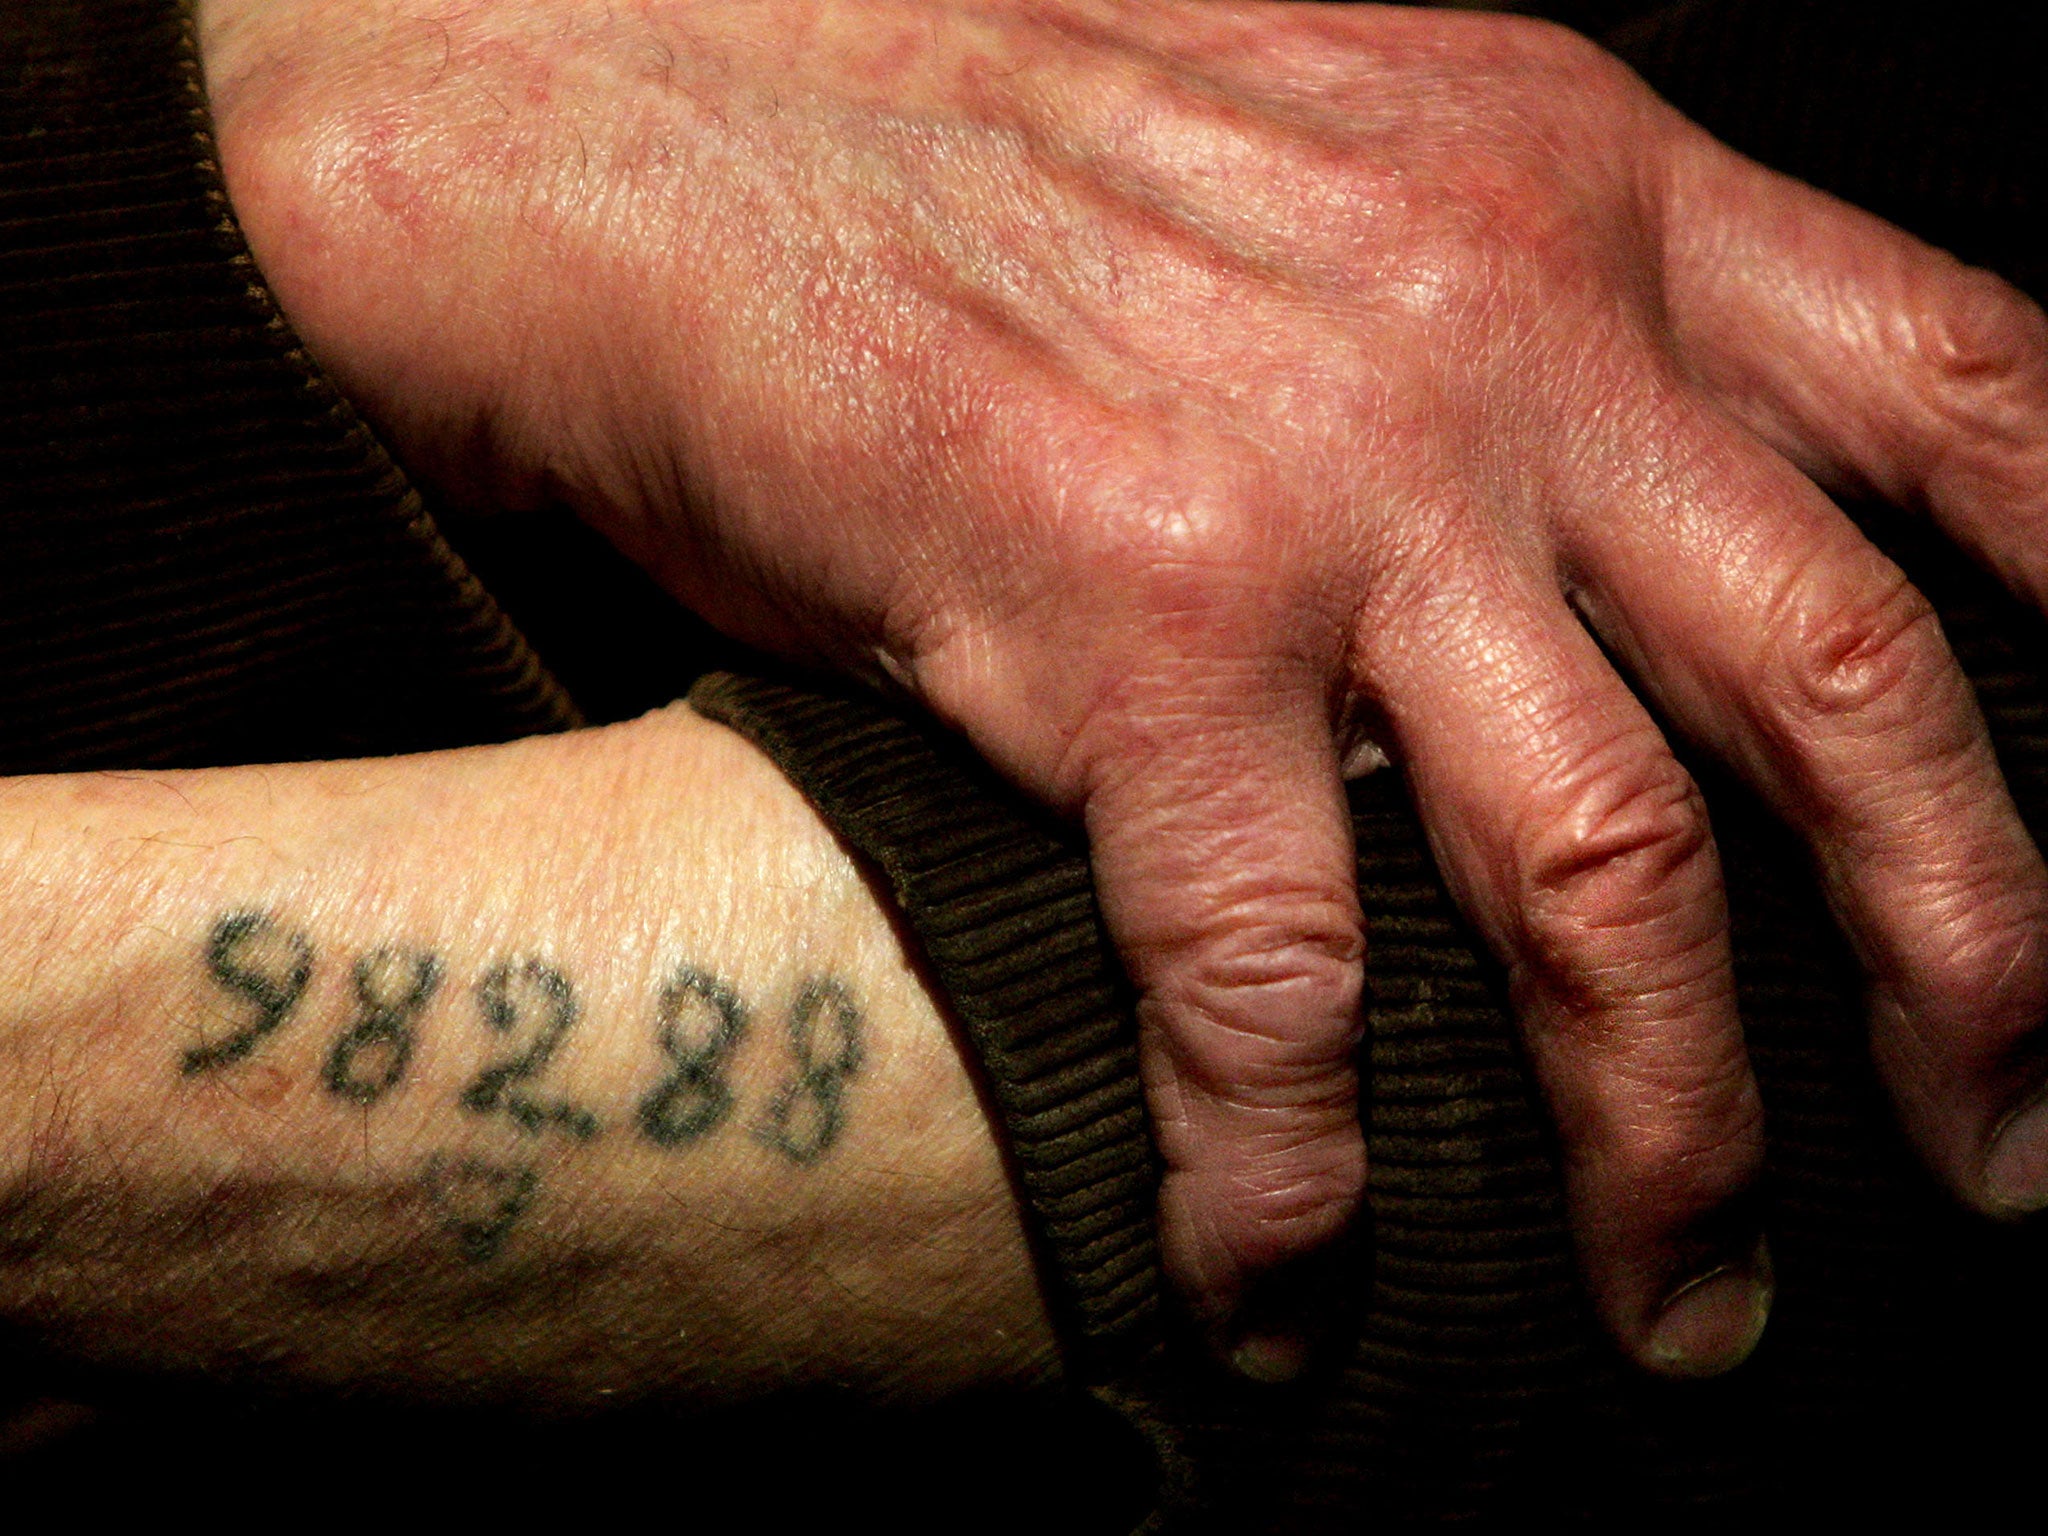 Ross County residents share the story behind their meaningful tattoos